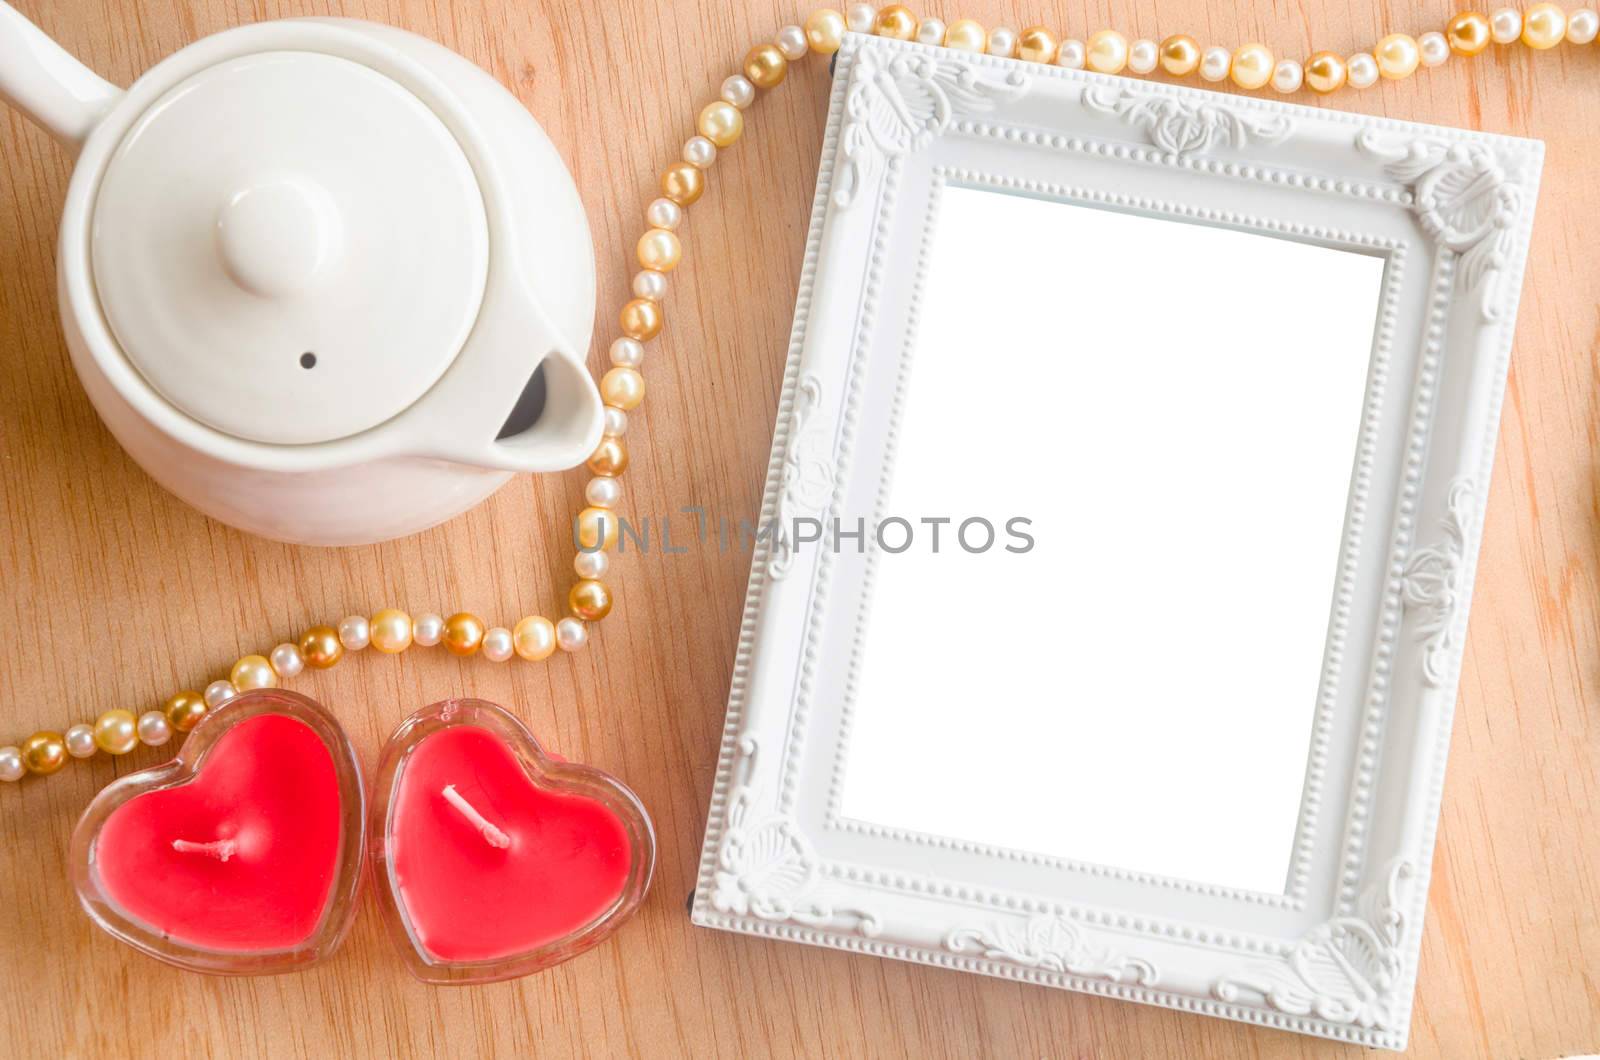 Vintage white photo frame and red heart shape candle on wooden background, clipping path.